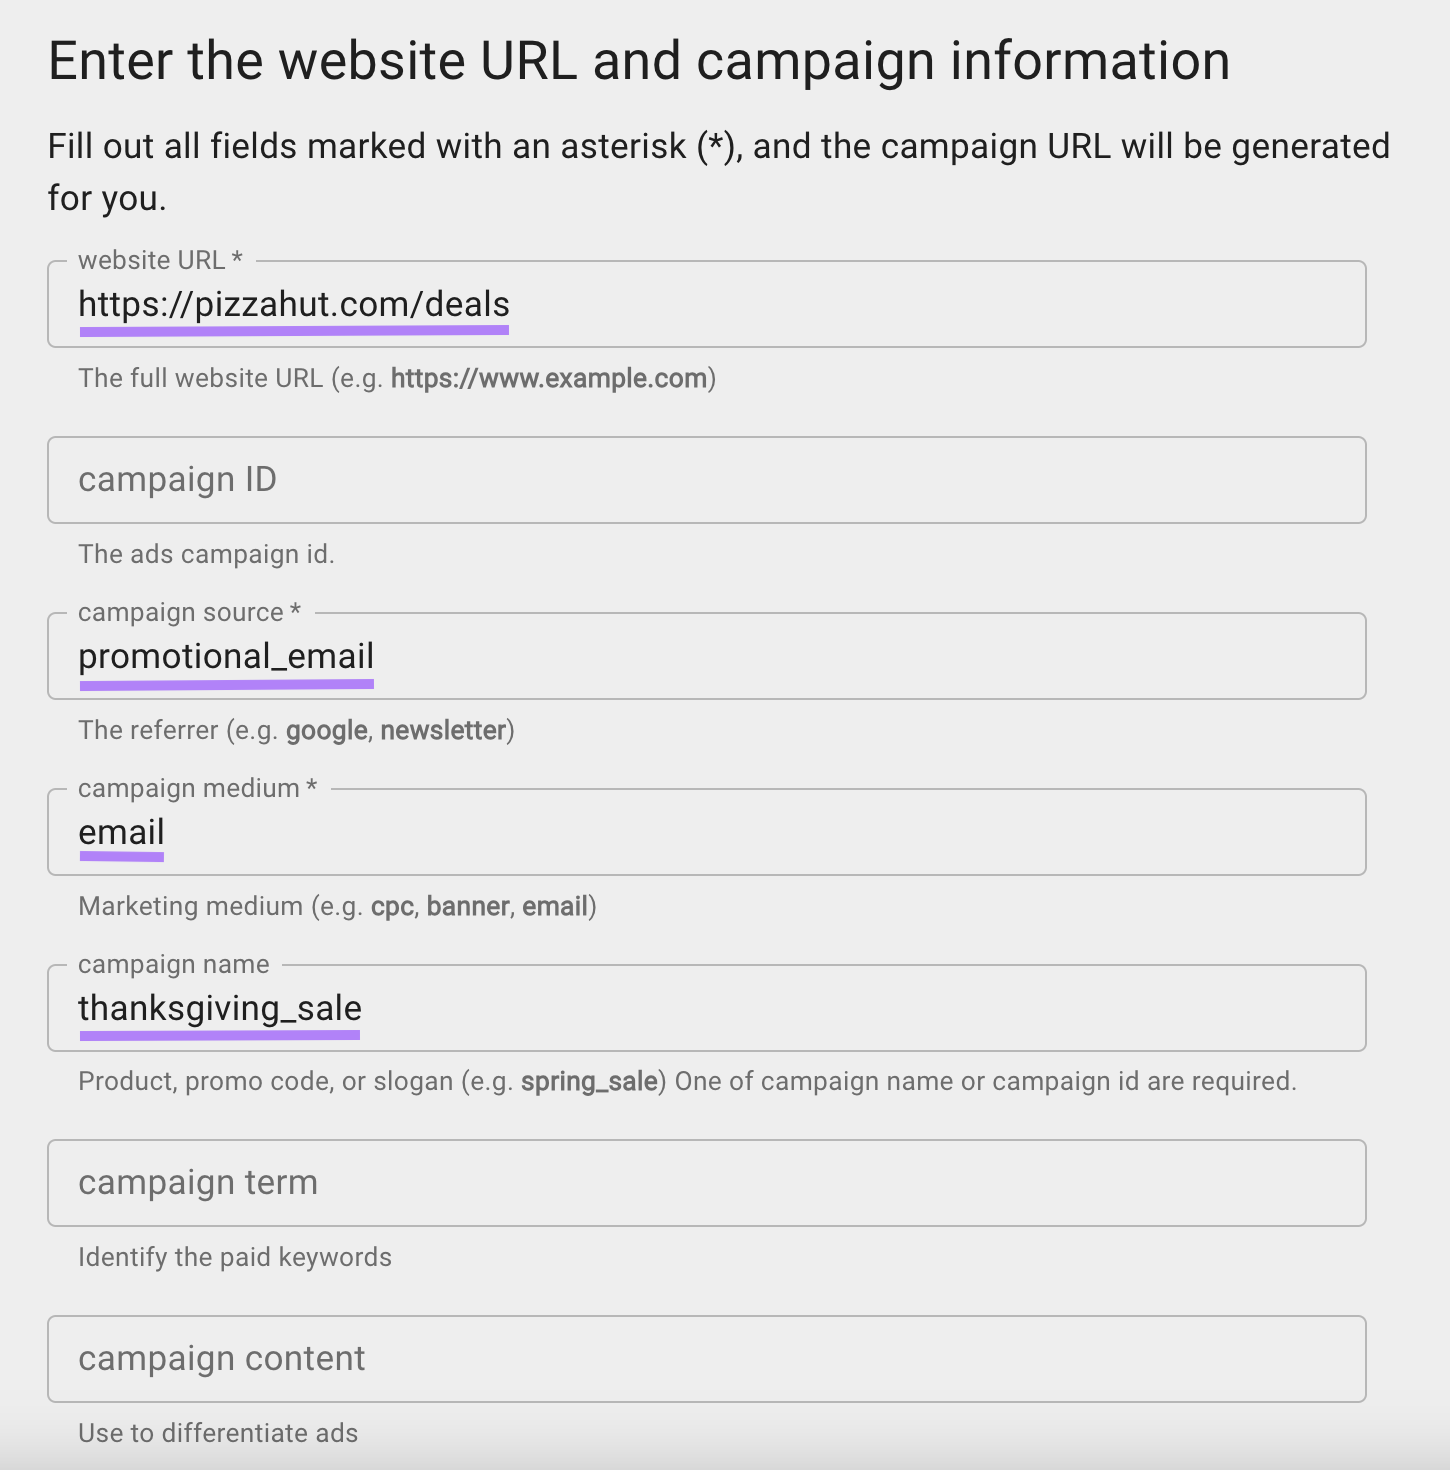 "Enter the website URL and campaign information" page with the information filled out